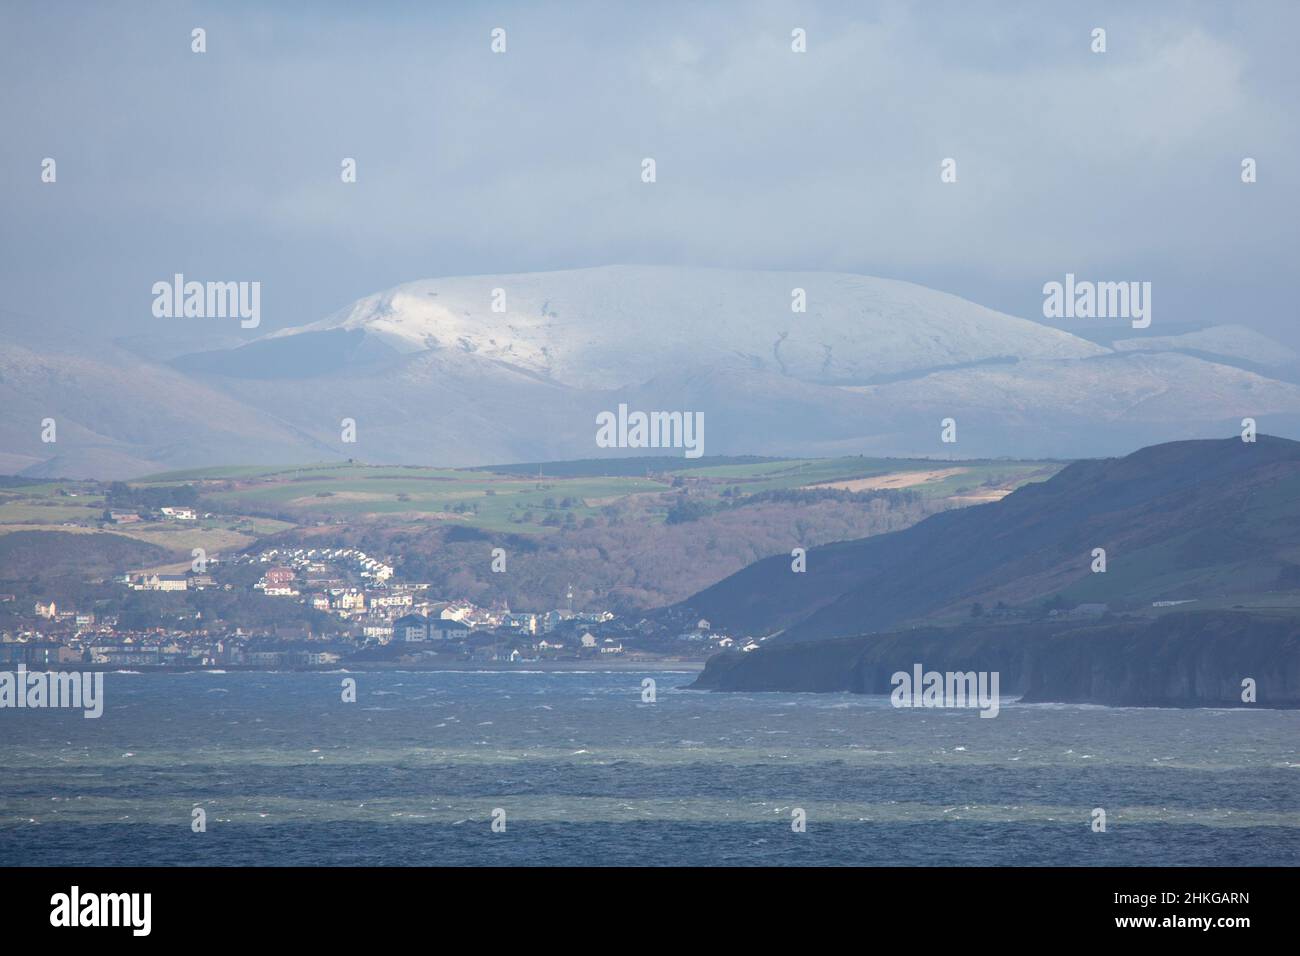 Llanon, Ceredigion, Wales, UK. 04th February 2022 UK Weather: Cold windy day in llanon, mid Wales. With a view across cardigan bay looking towards the seaside town of Aberystwyth and the snow topped mountains of snowdonia in the far distance. © Ian Jones/Alamy Live News Stock Photo